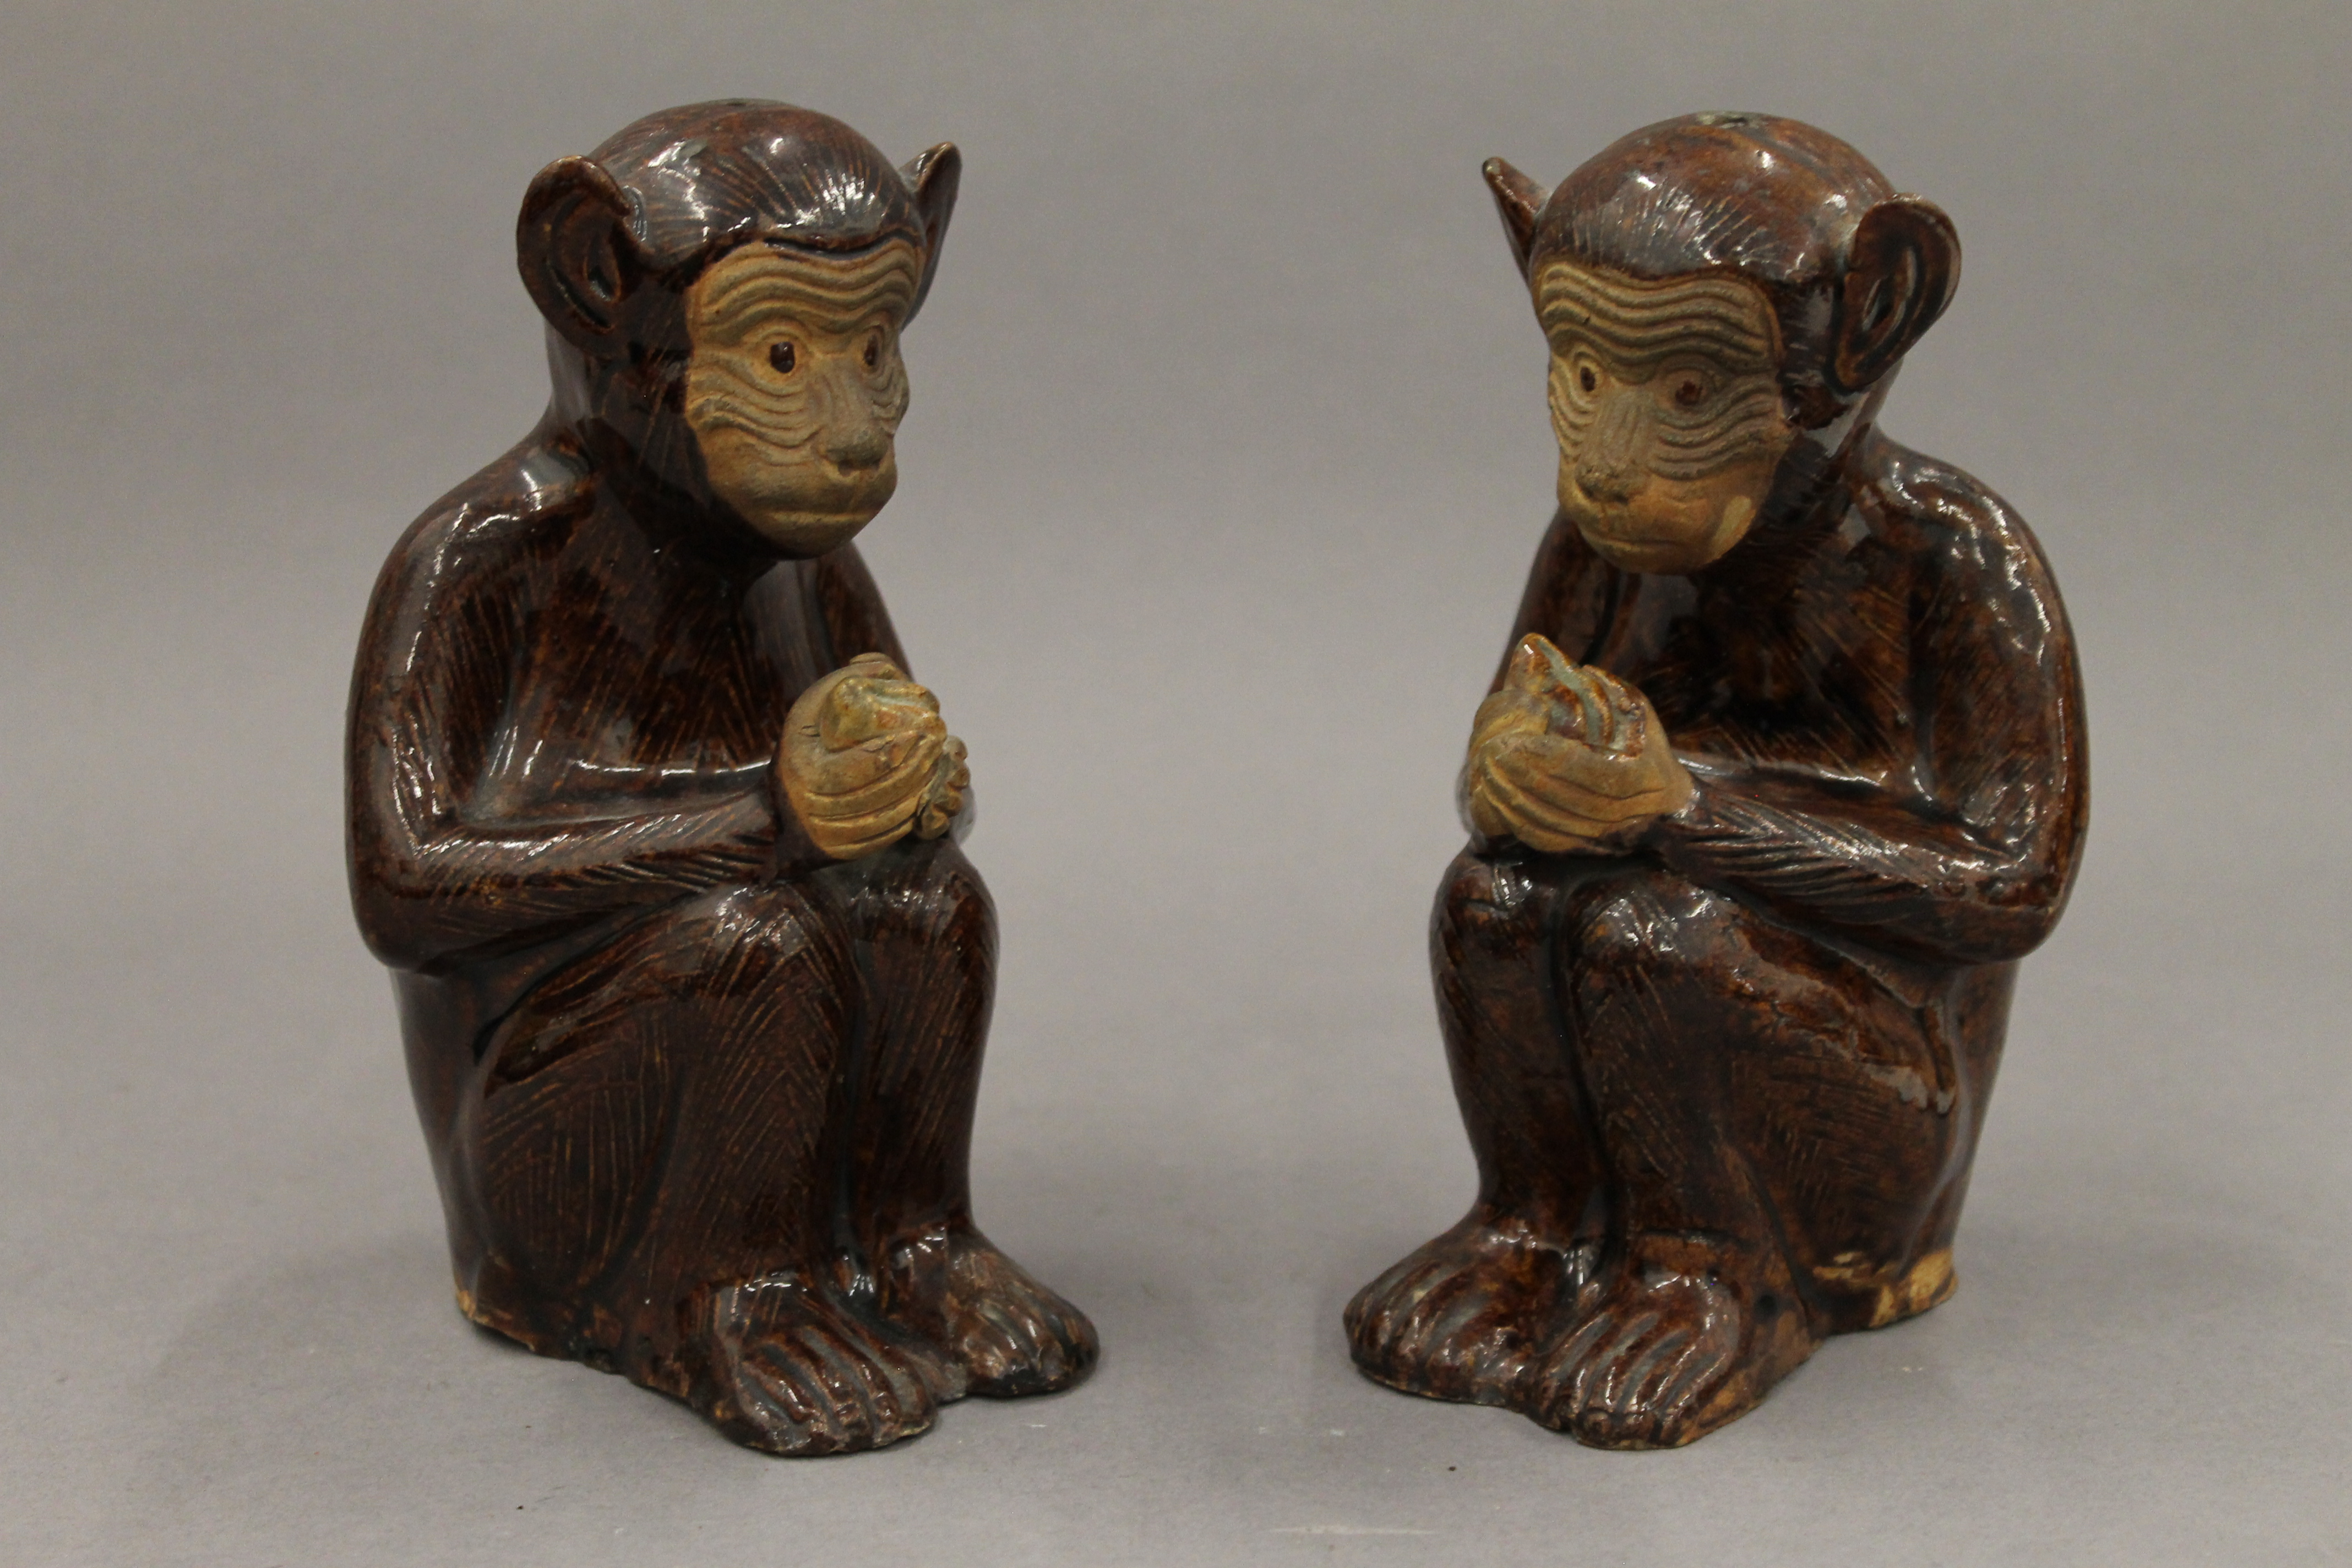 A pair of pottery censers formed as monkeys. Each 15 cm high.